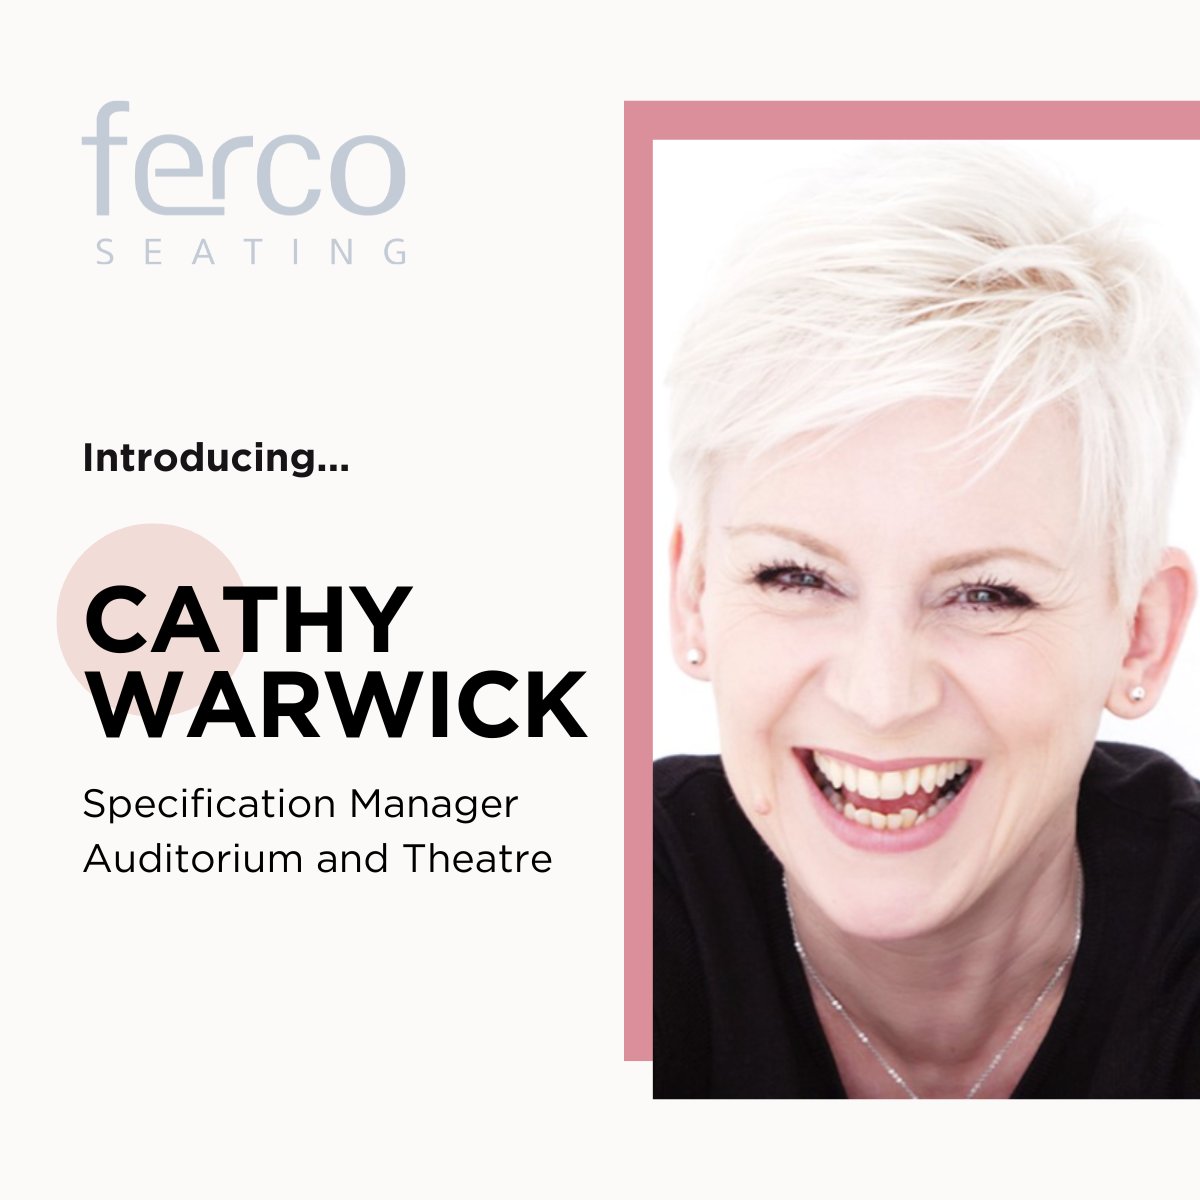 We are delighted to welcome and introduce you to Cathy Warwick, who joins Ferco today as our Specification Manager for #auditorium and #theatre. 
#NewStarter #Architecture #ArchitectureDaily #Design #UK #Seating #TeamGrowth